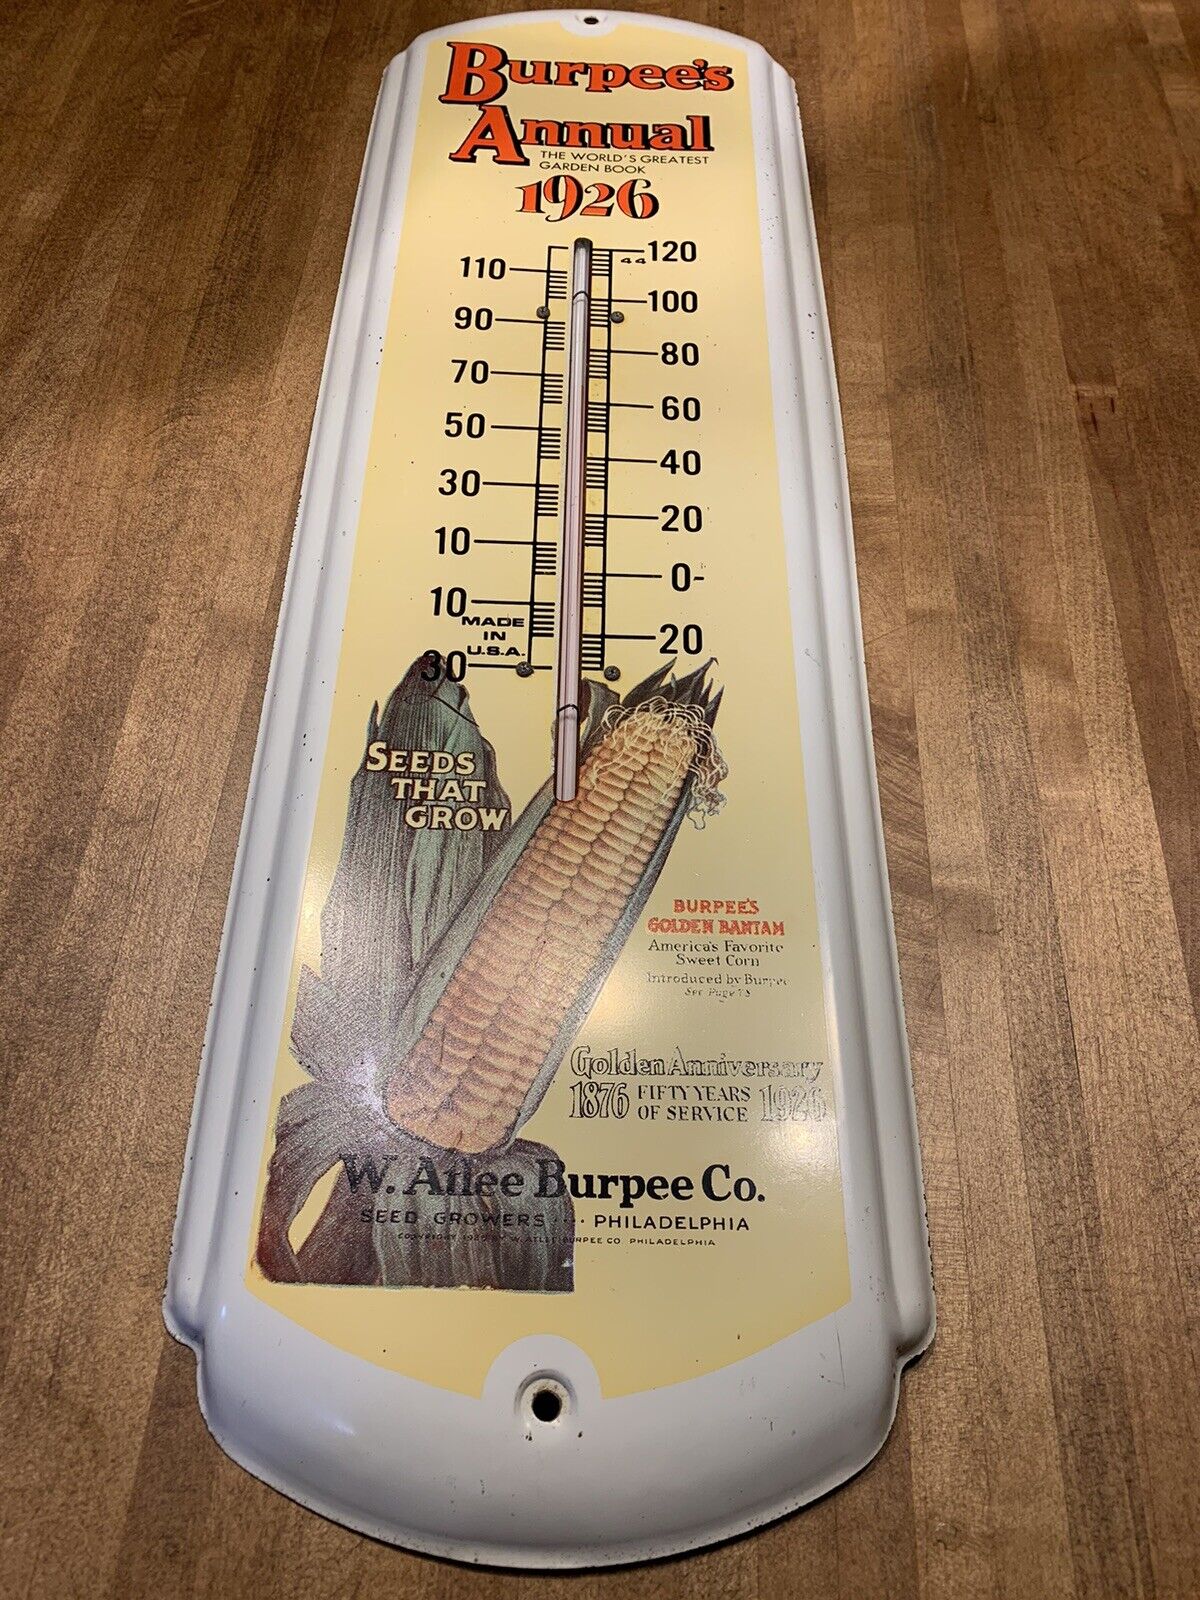 Burpee’s Annual Thermometer- Advertising Metal Sign - Gardening- 1926 - Farm